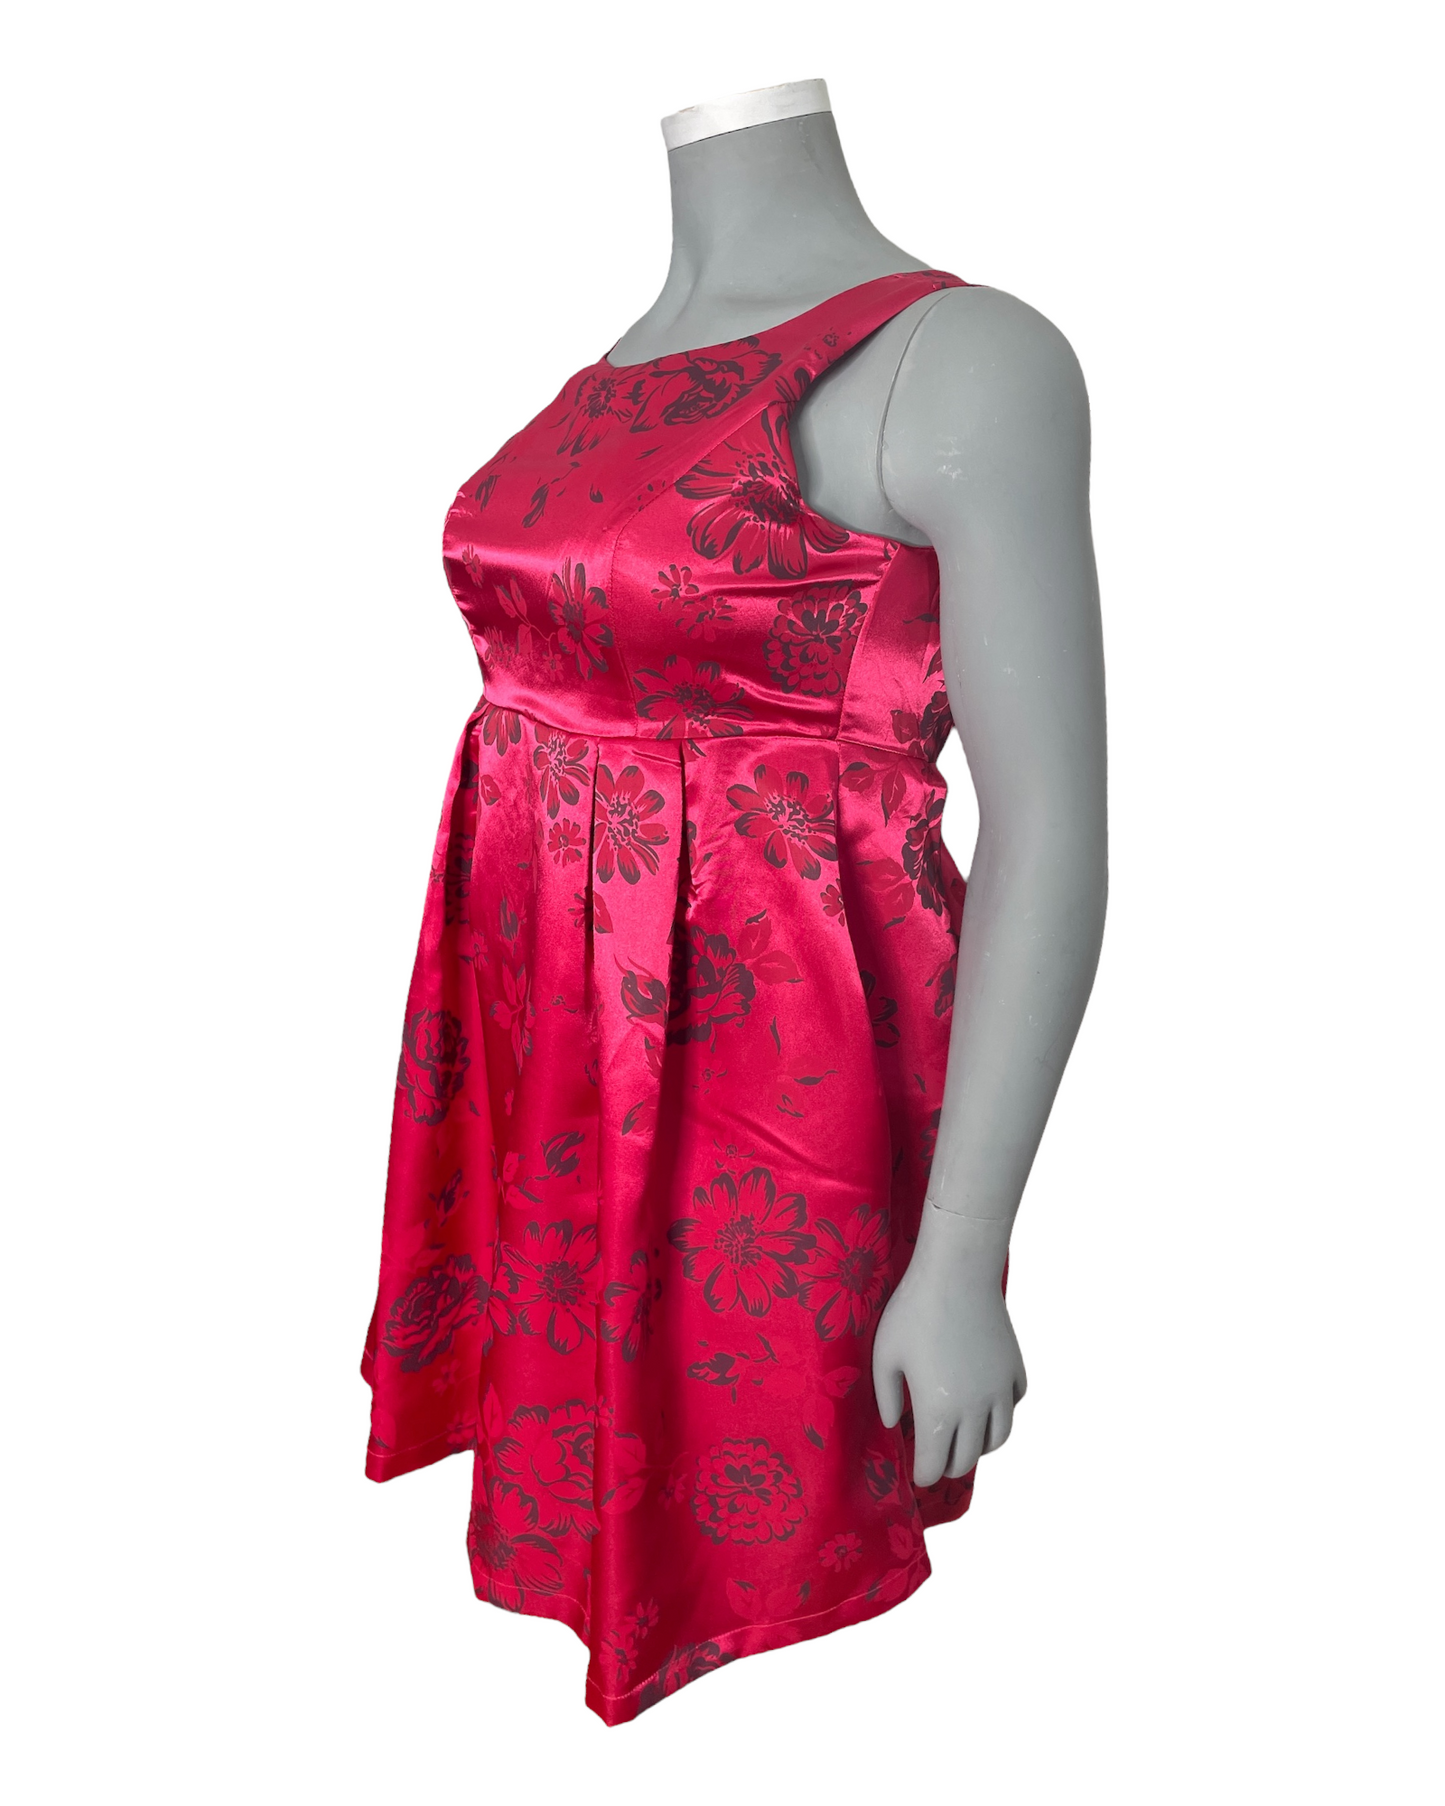 “Ruby Belle” Bright Pink W/ Red Floral Print Mini Dress (10)